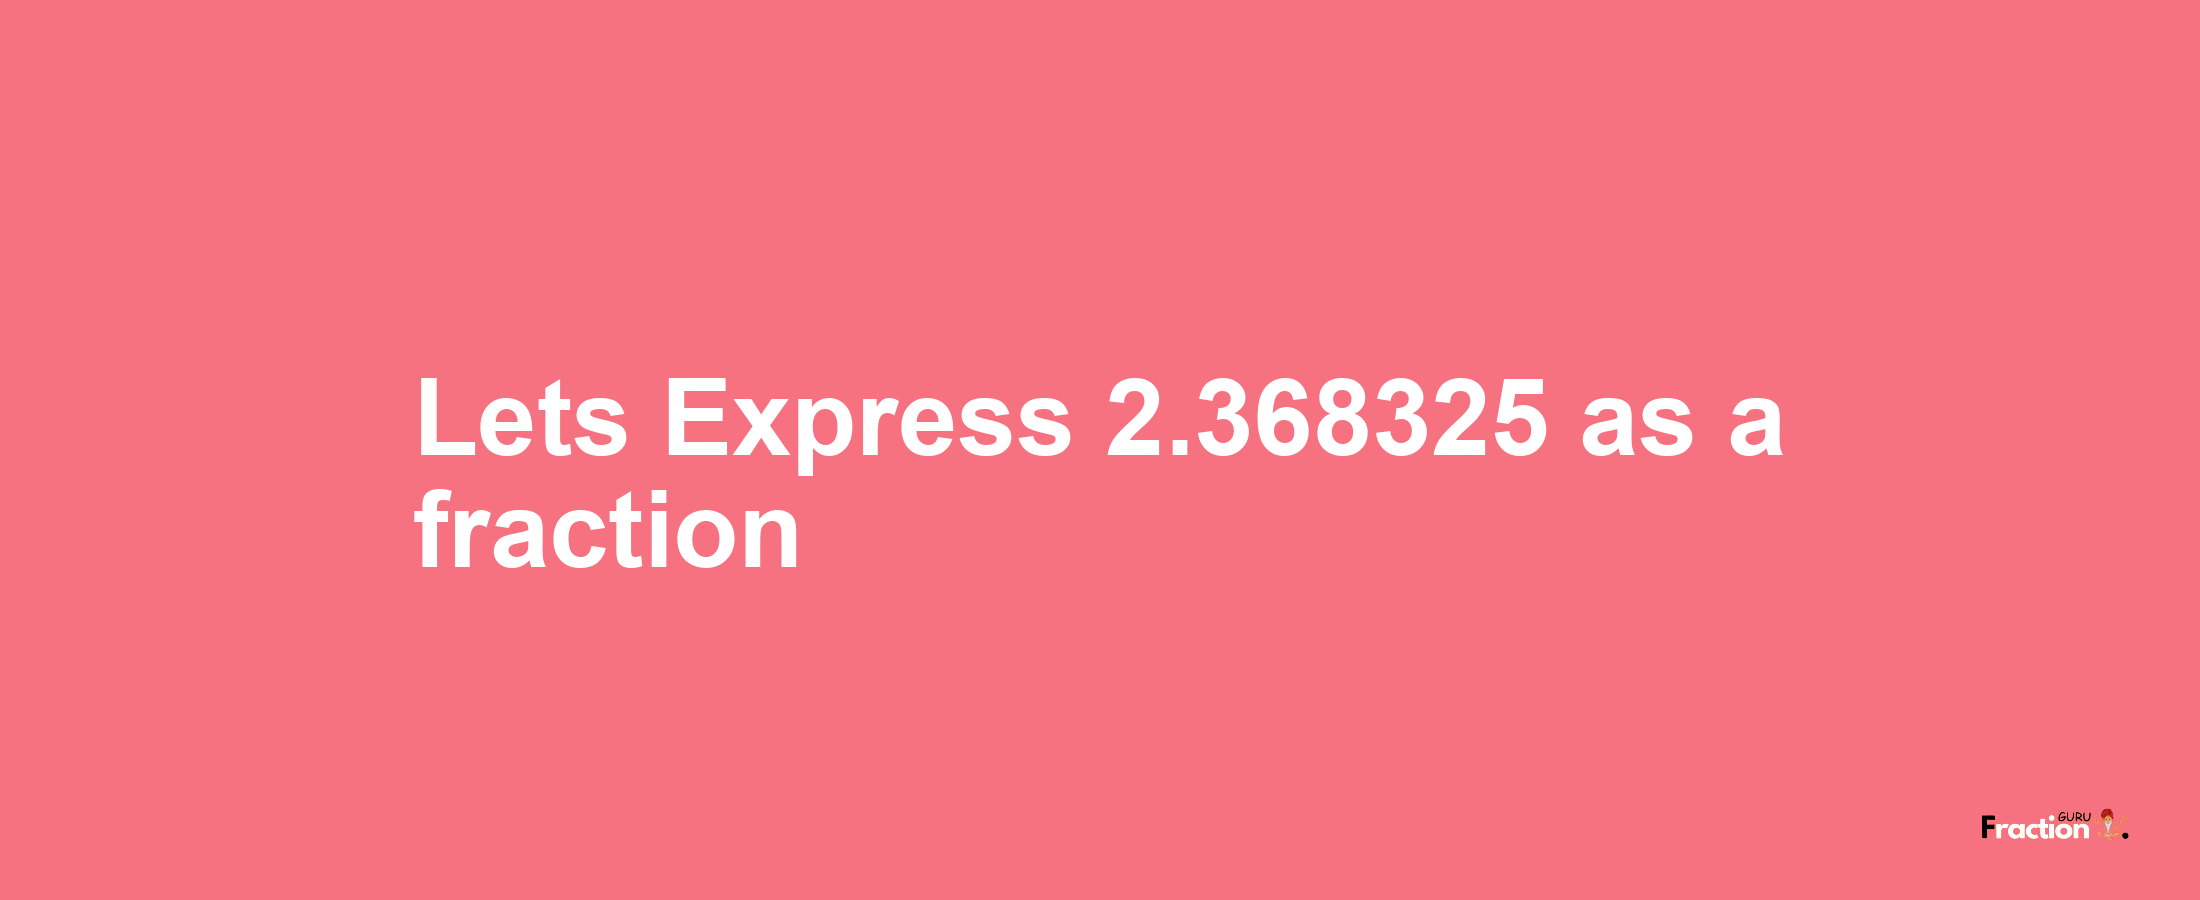 Lets Express 2.368325 as afraction